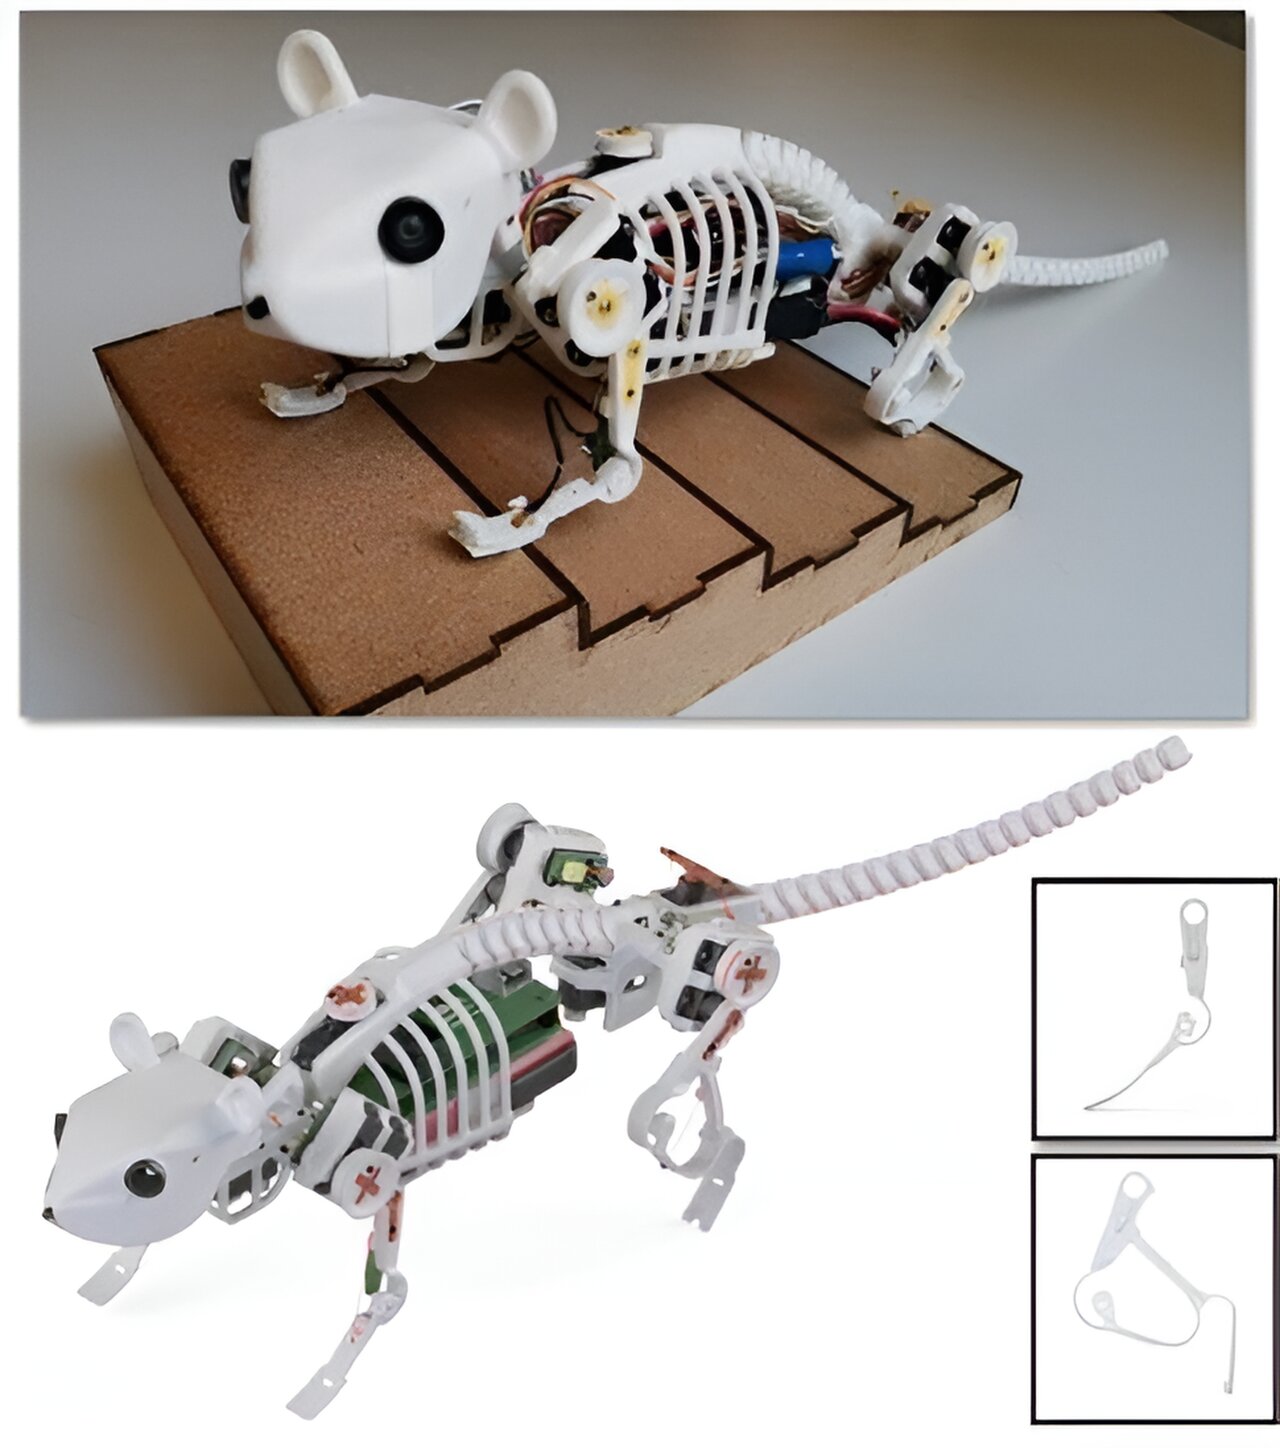 Adding a flexible spine and tail makes mouse robot more nimble